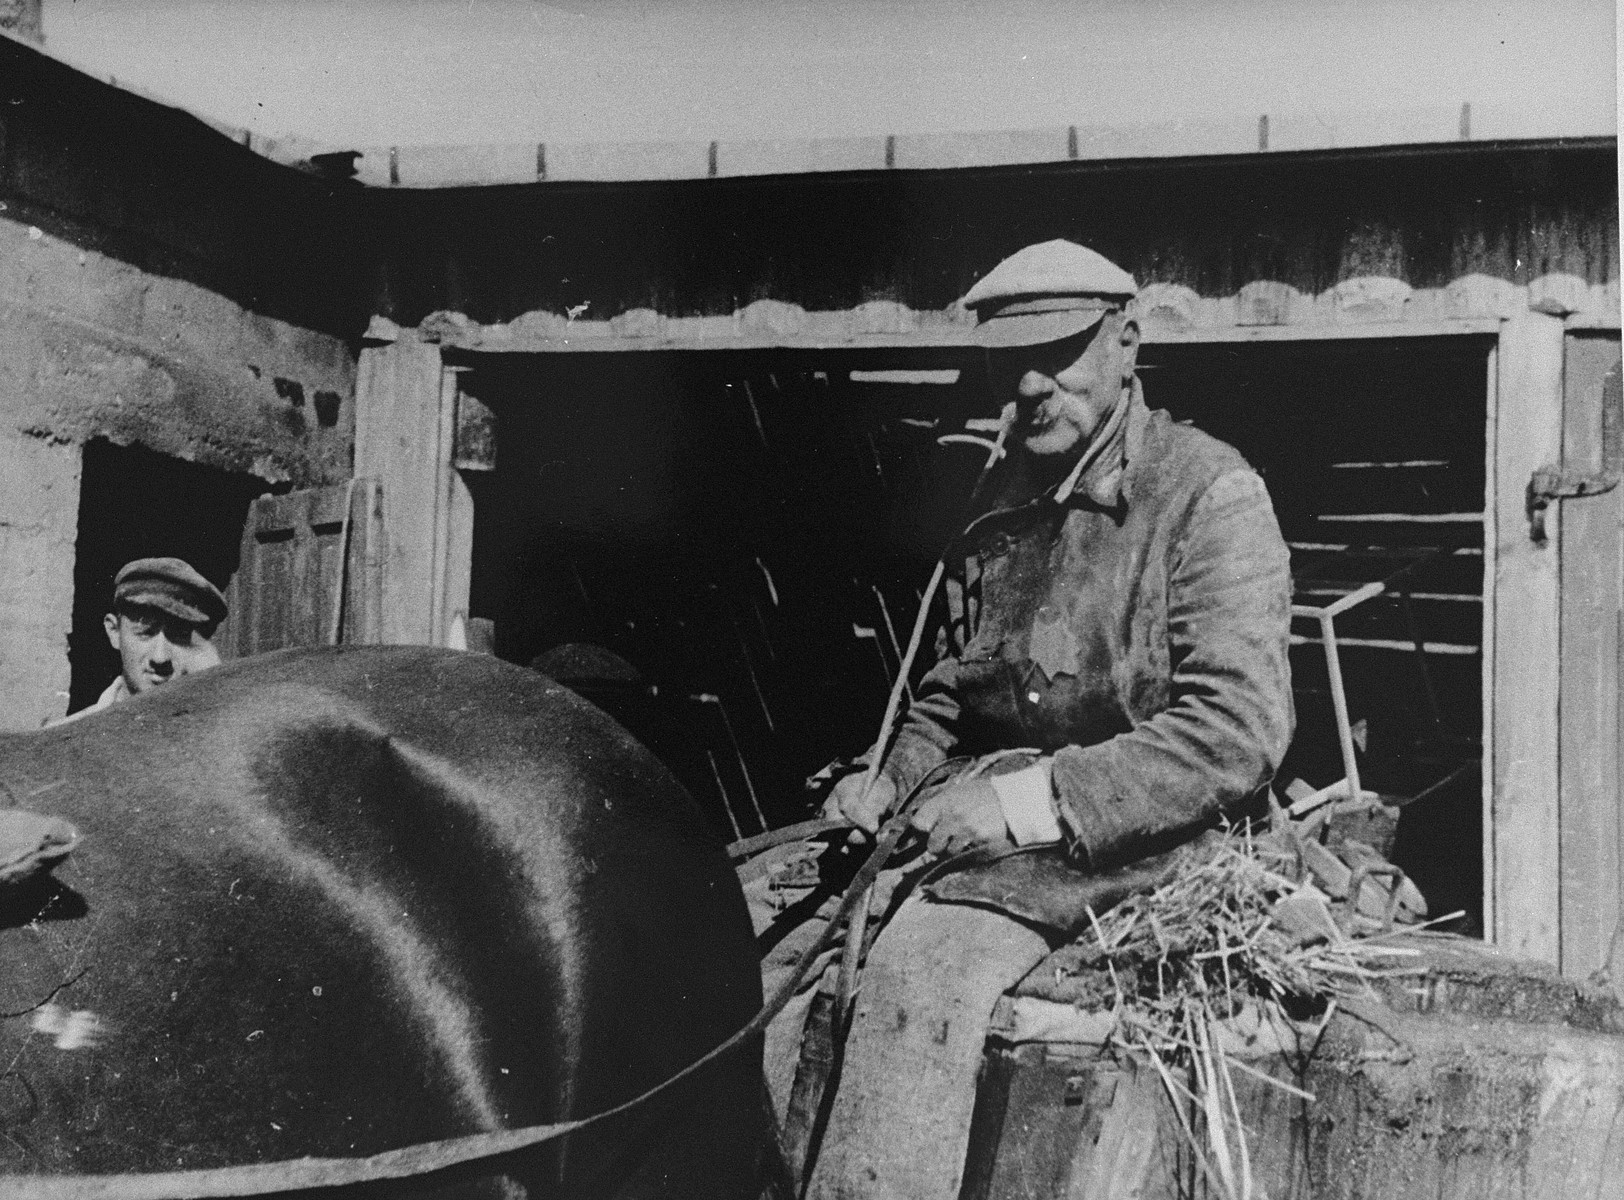 A close-up of Max Teinovitz sitting on a horse-drawn cart used for collecting sewage; the sewage was pumped out manually. 

His son, Meir can be seen on the left.  He was a member of the resistance and, according to the photographer Kadish, moved to Israel after the war.